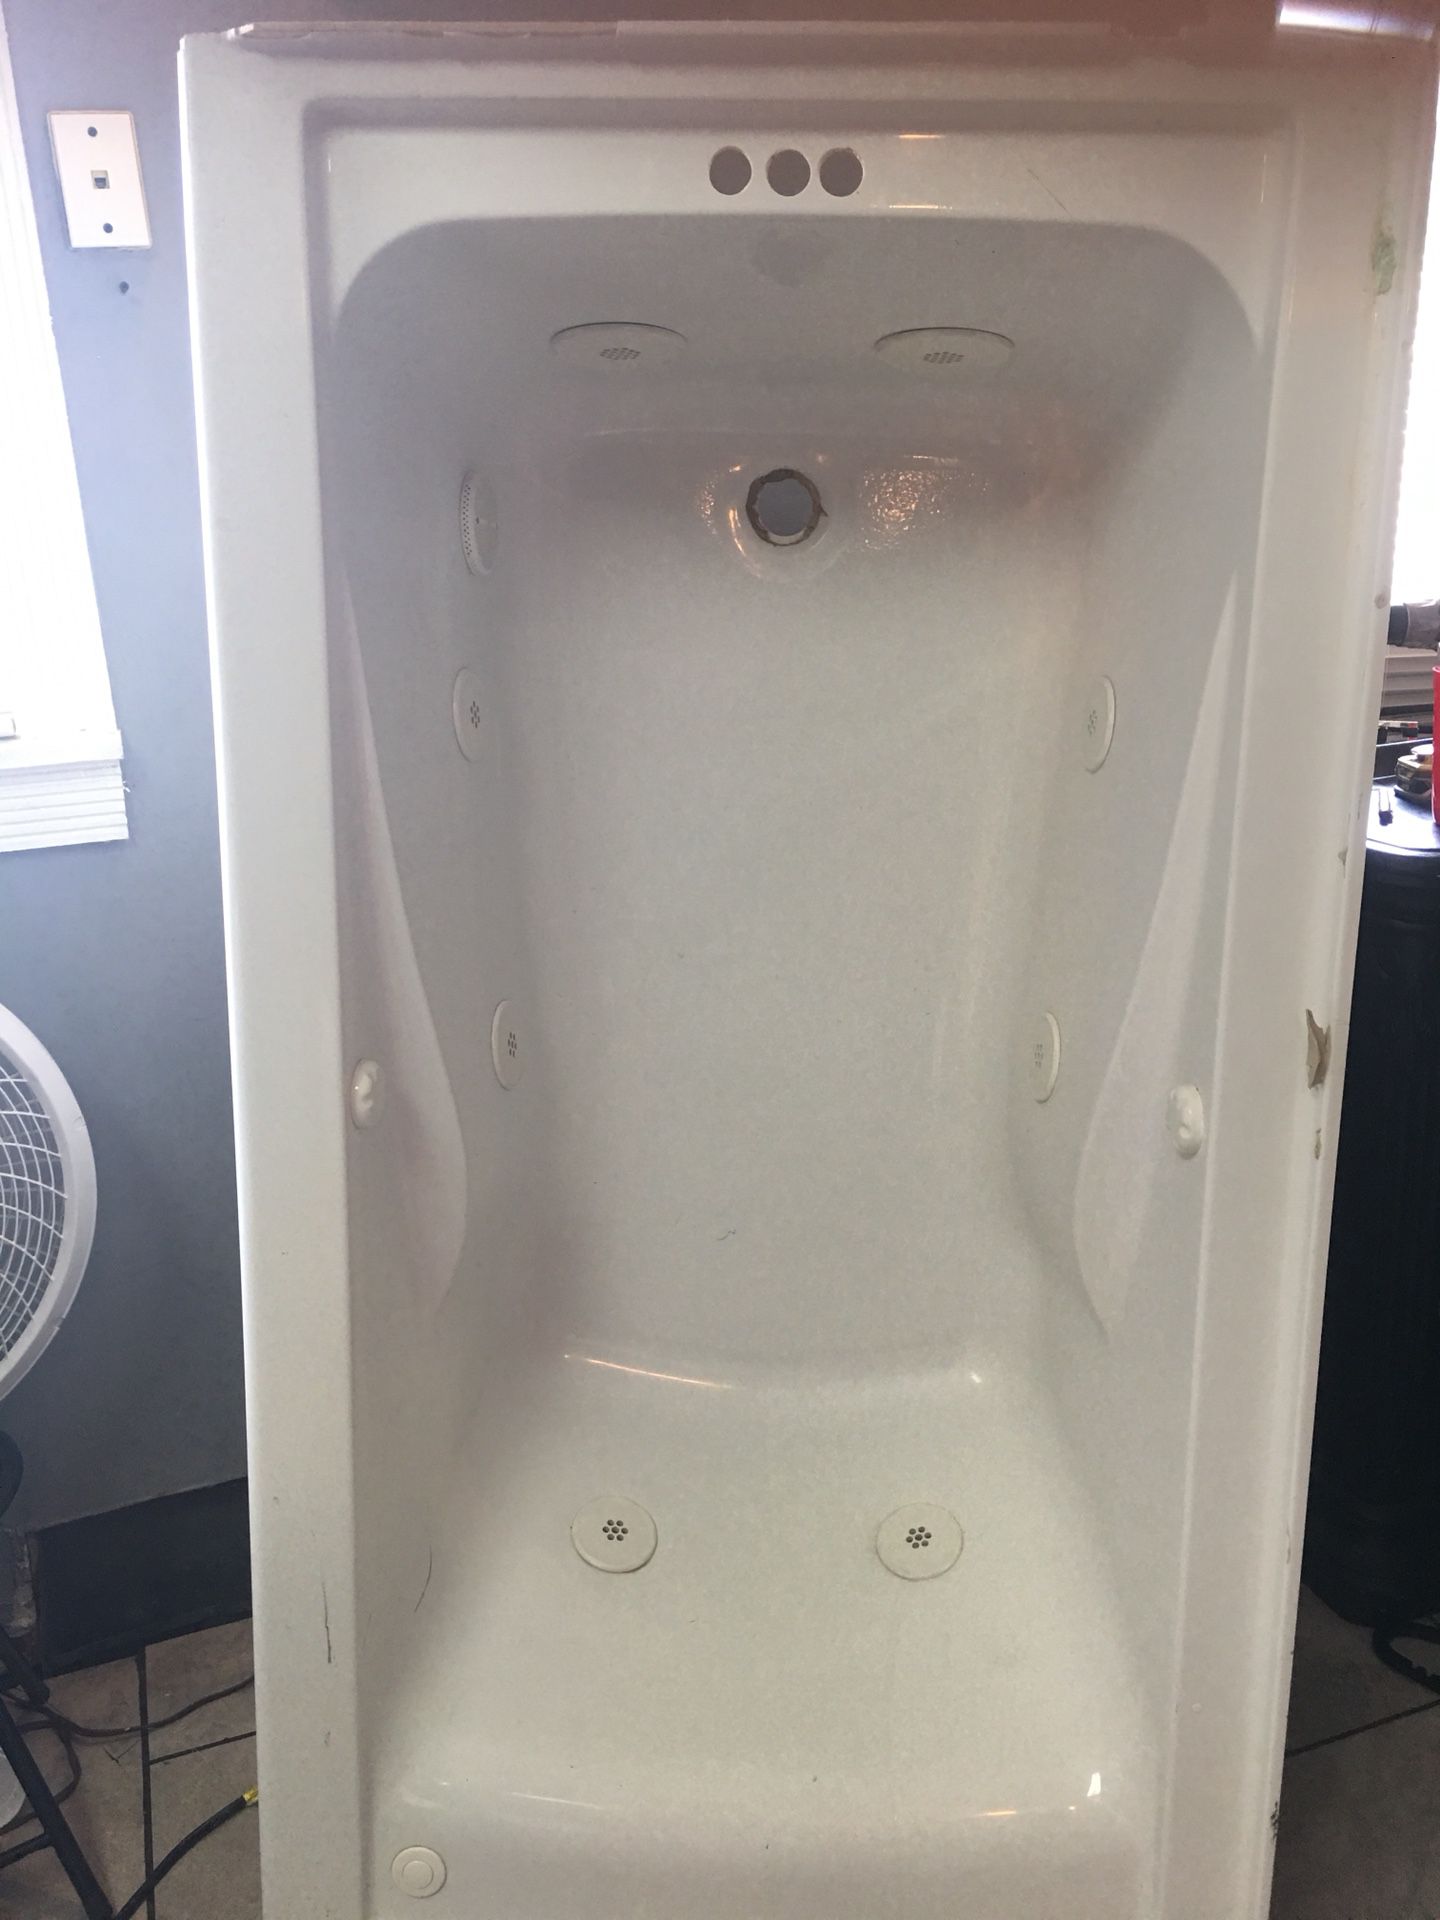 Fiber glass tub in good condition. 8 jet electric hot tub